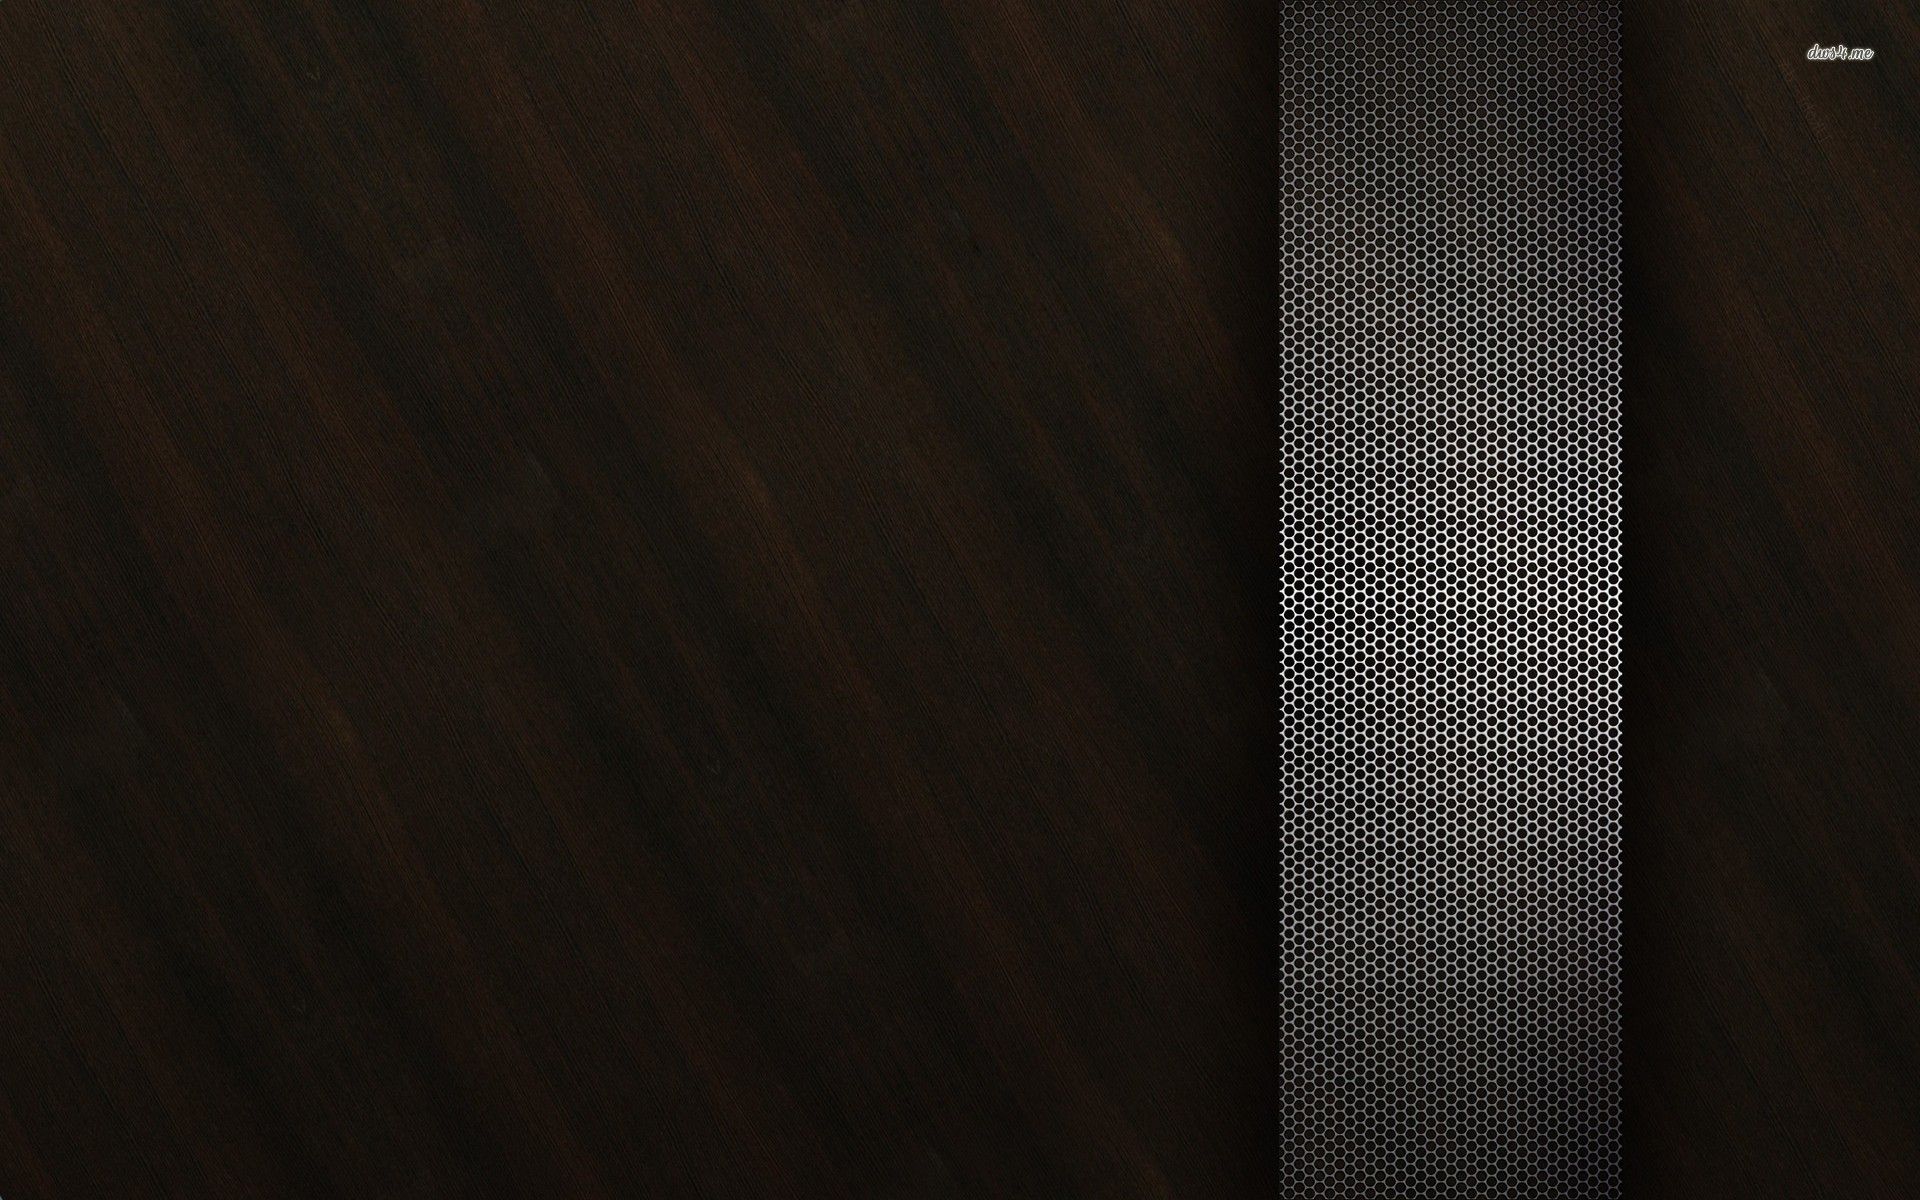 Wood and metal texture wallpaper - Abstract wallpapers - #15936